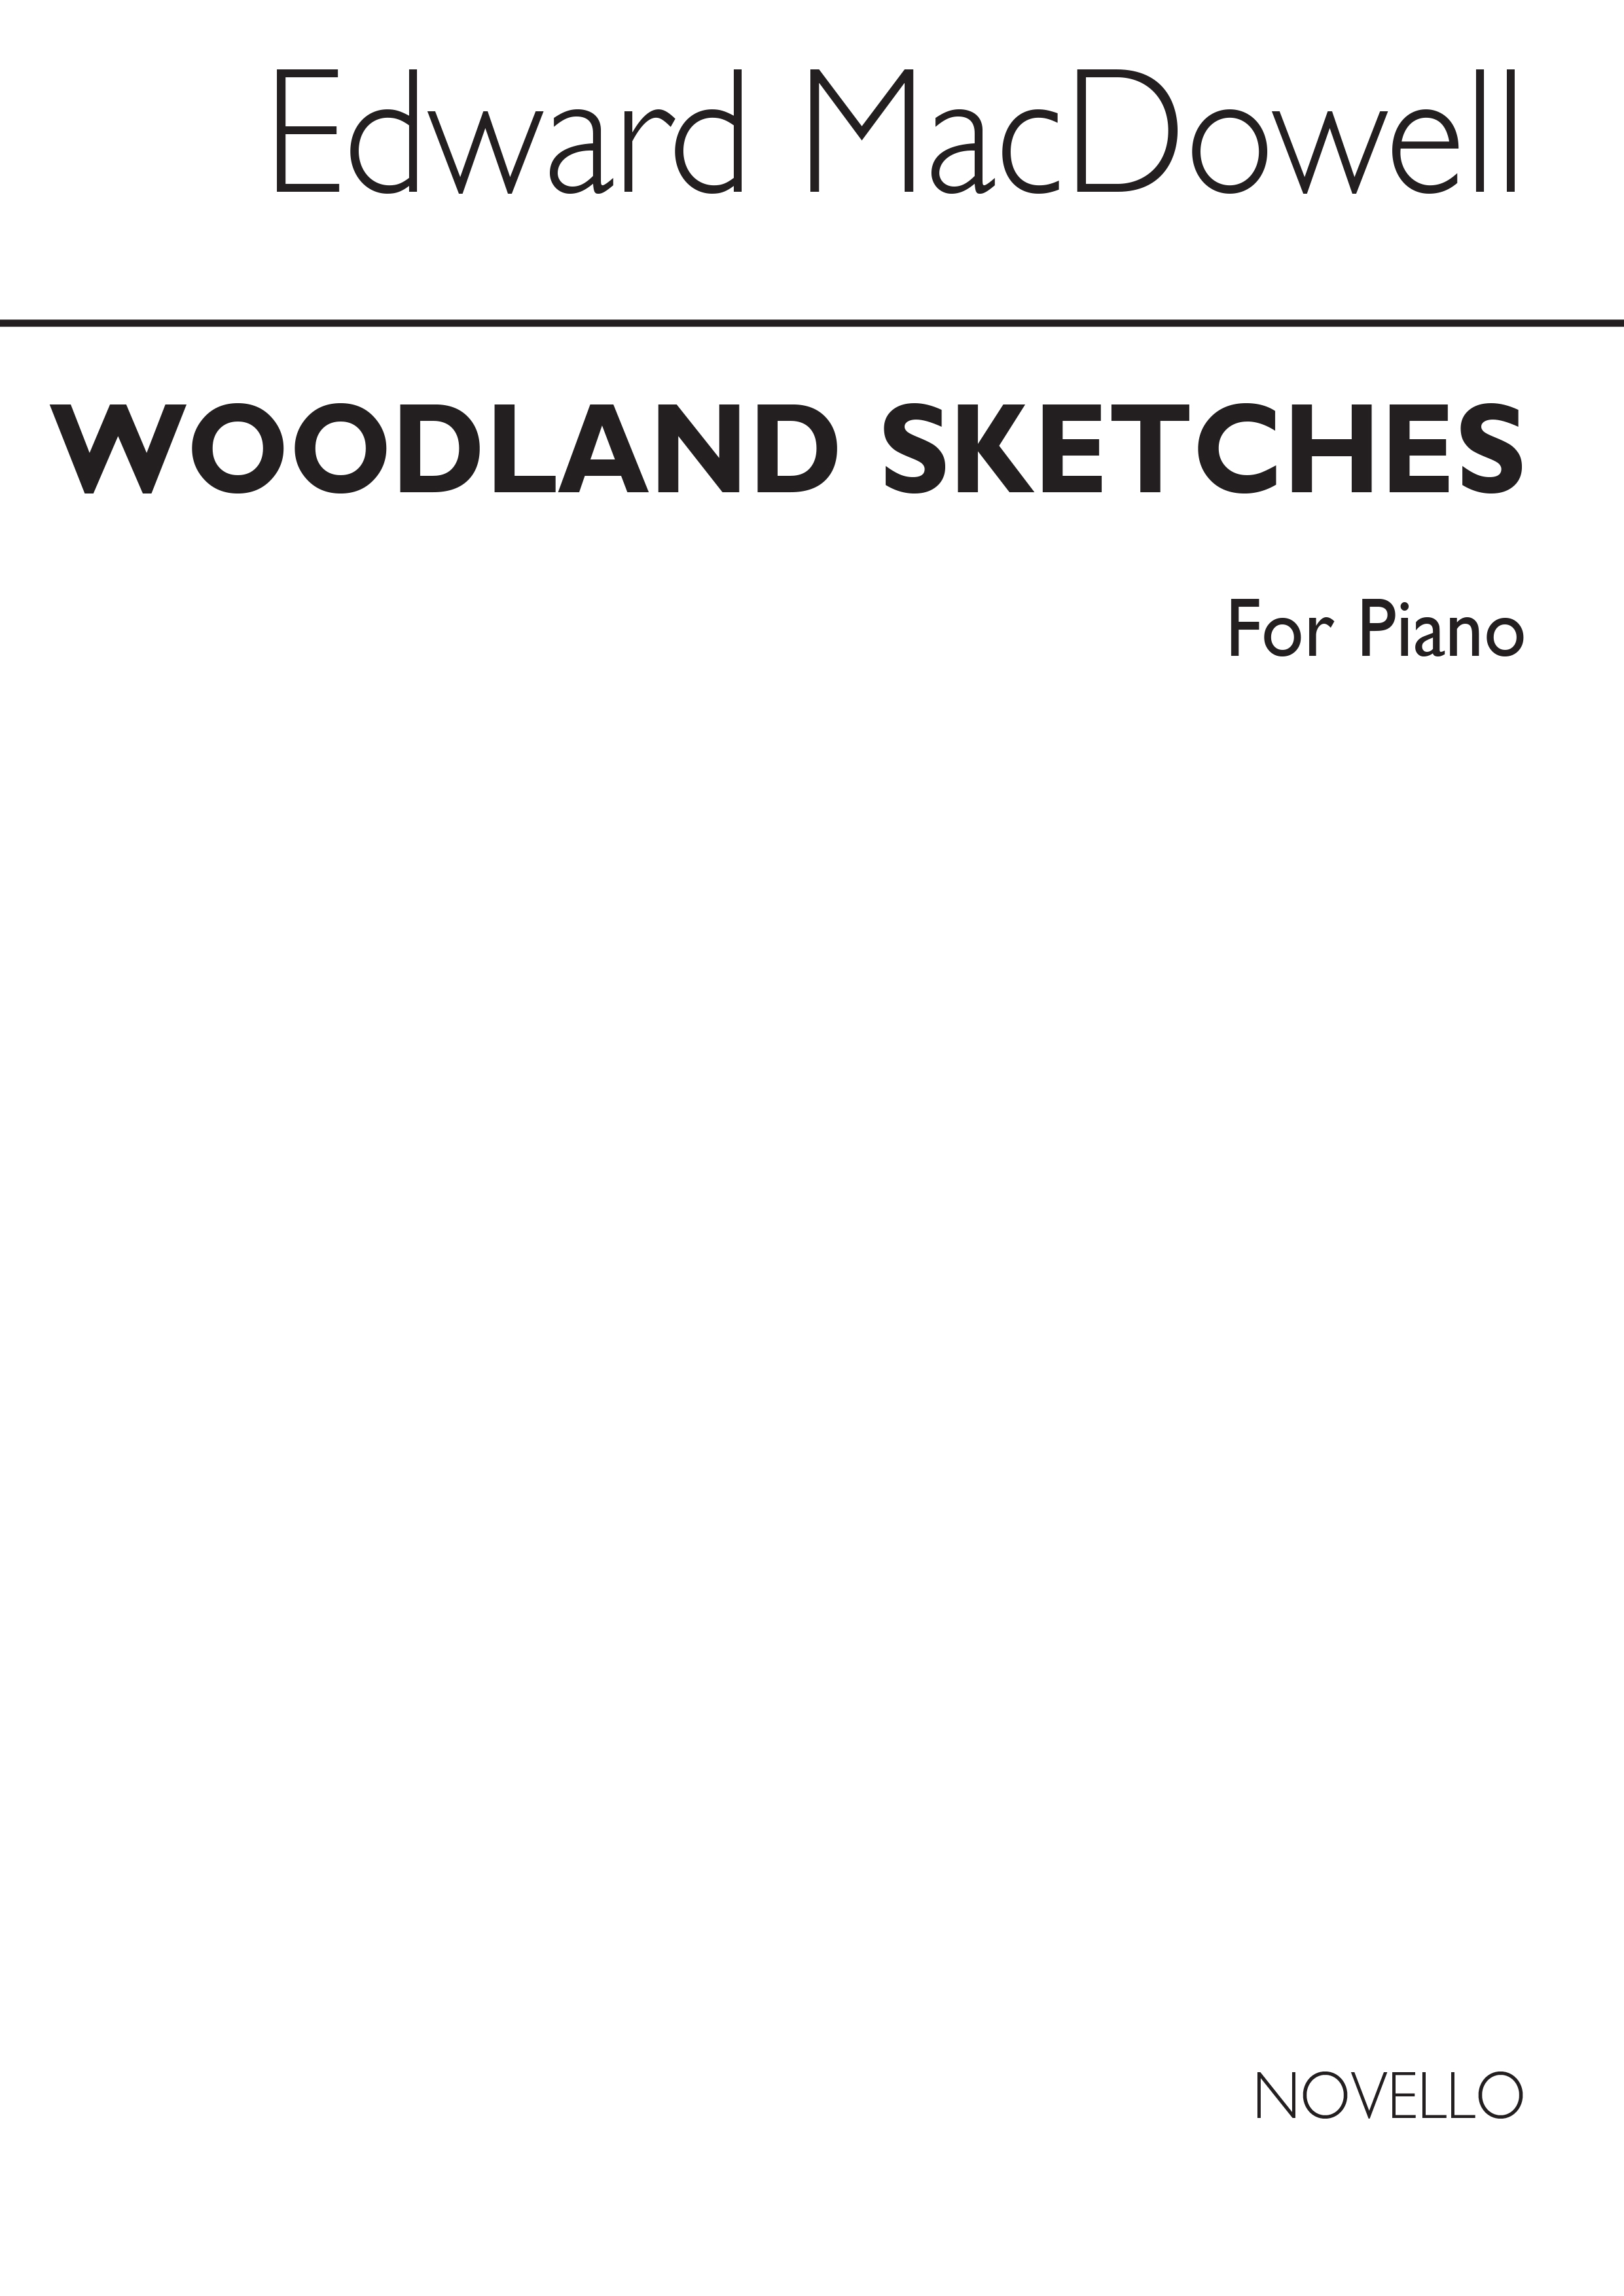 Edward Macdowell: Woodland Sketches (Complete) Piano